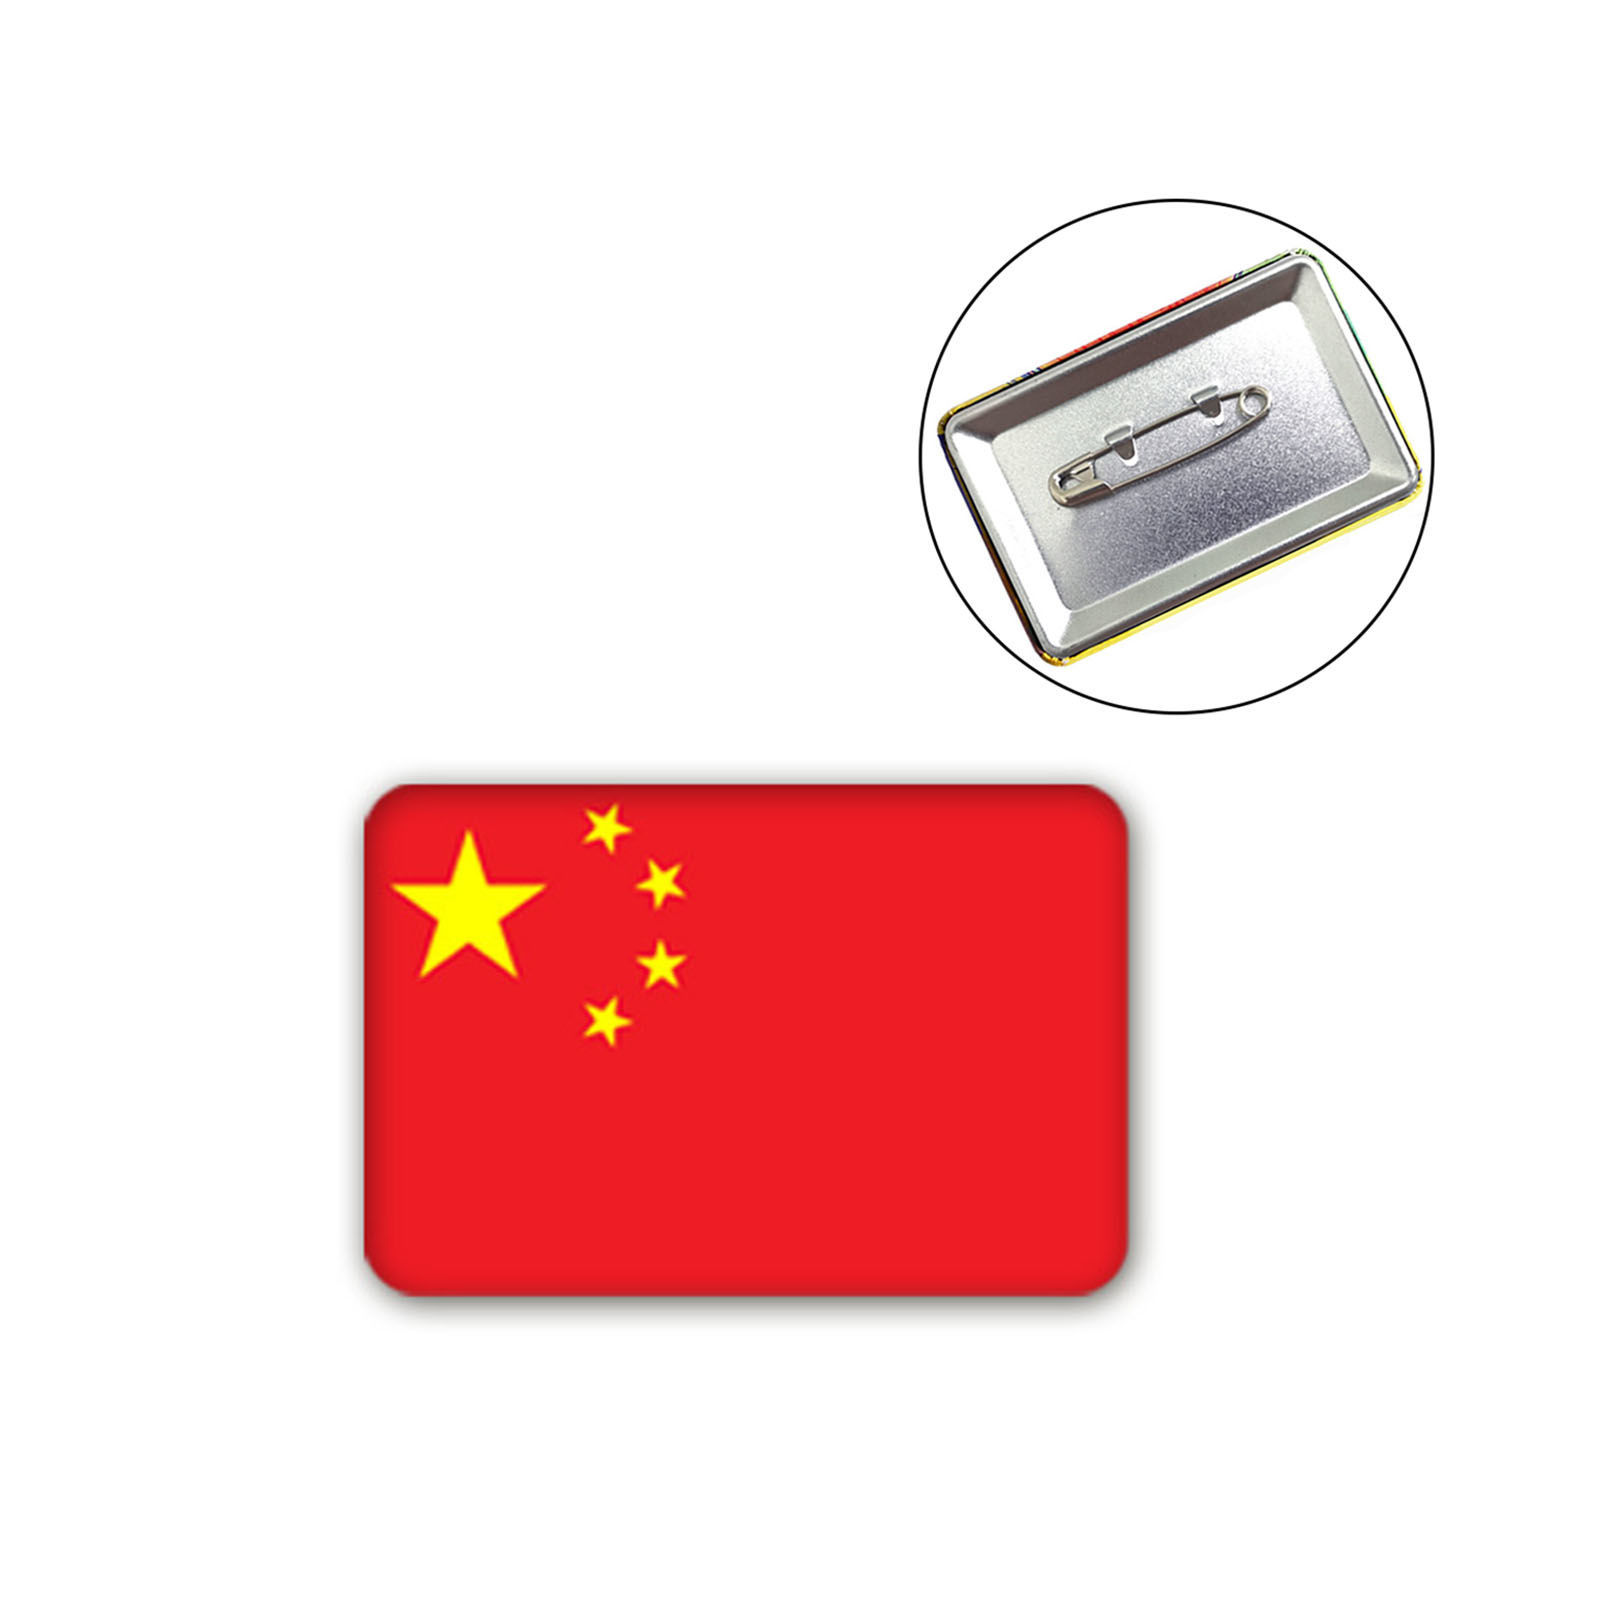 Picture of Pin Brooches Rectangle Chinese Flag Red & Yellow 6cm x 4cm, 1 Piece